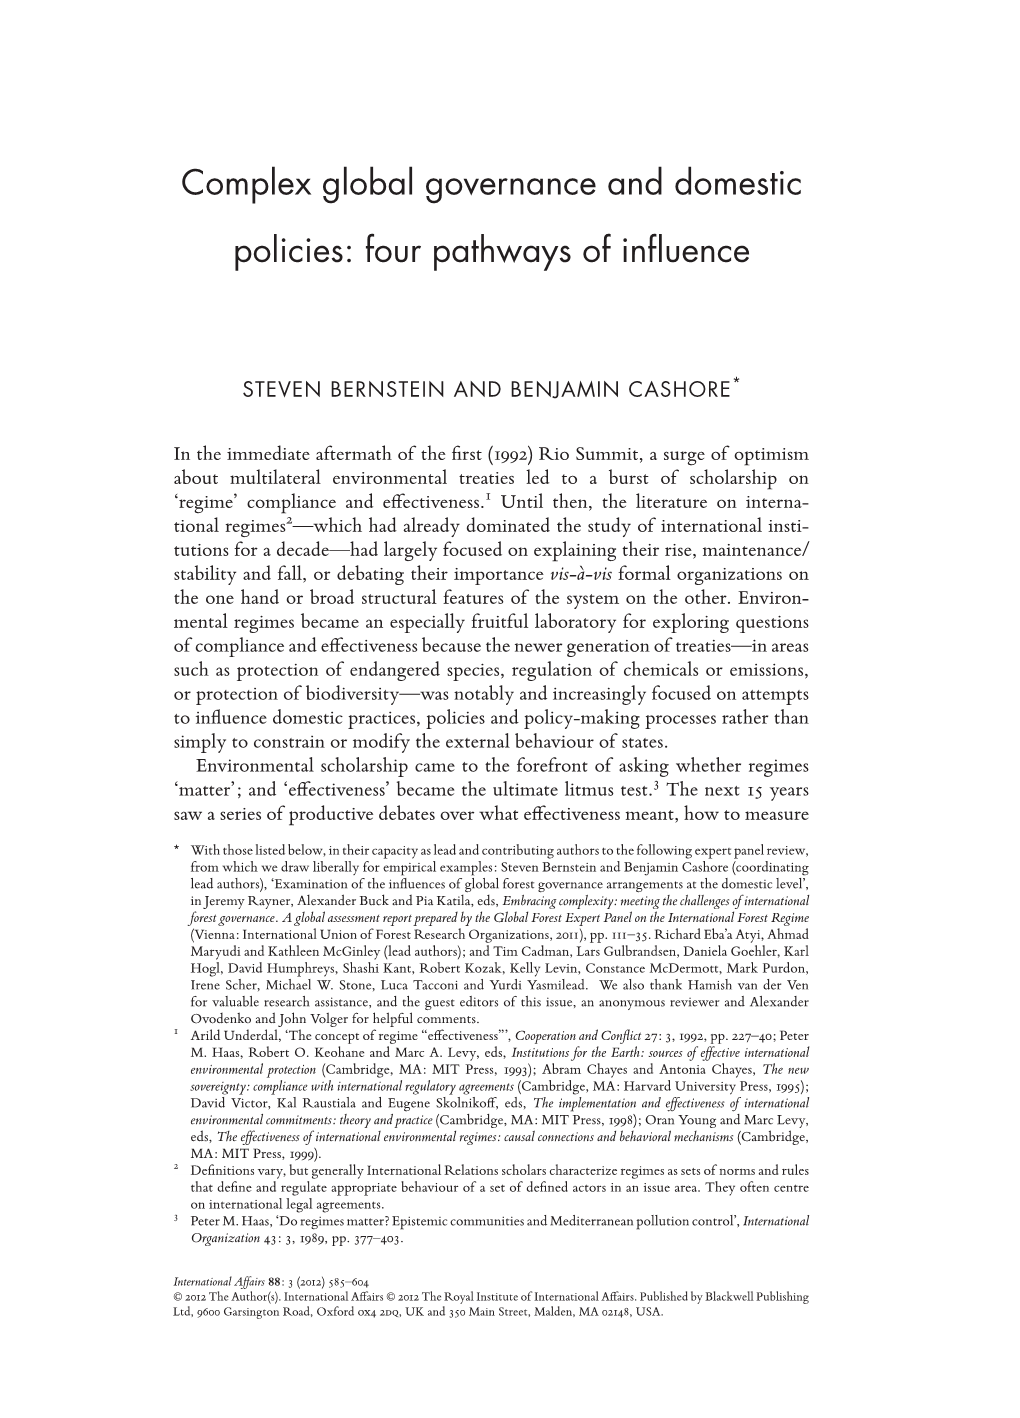 Complex Global Governance and Domestic Policies: Four Pathways of Inﬂuence